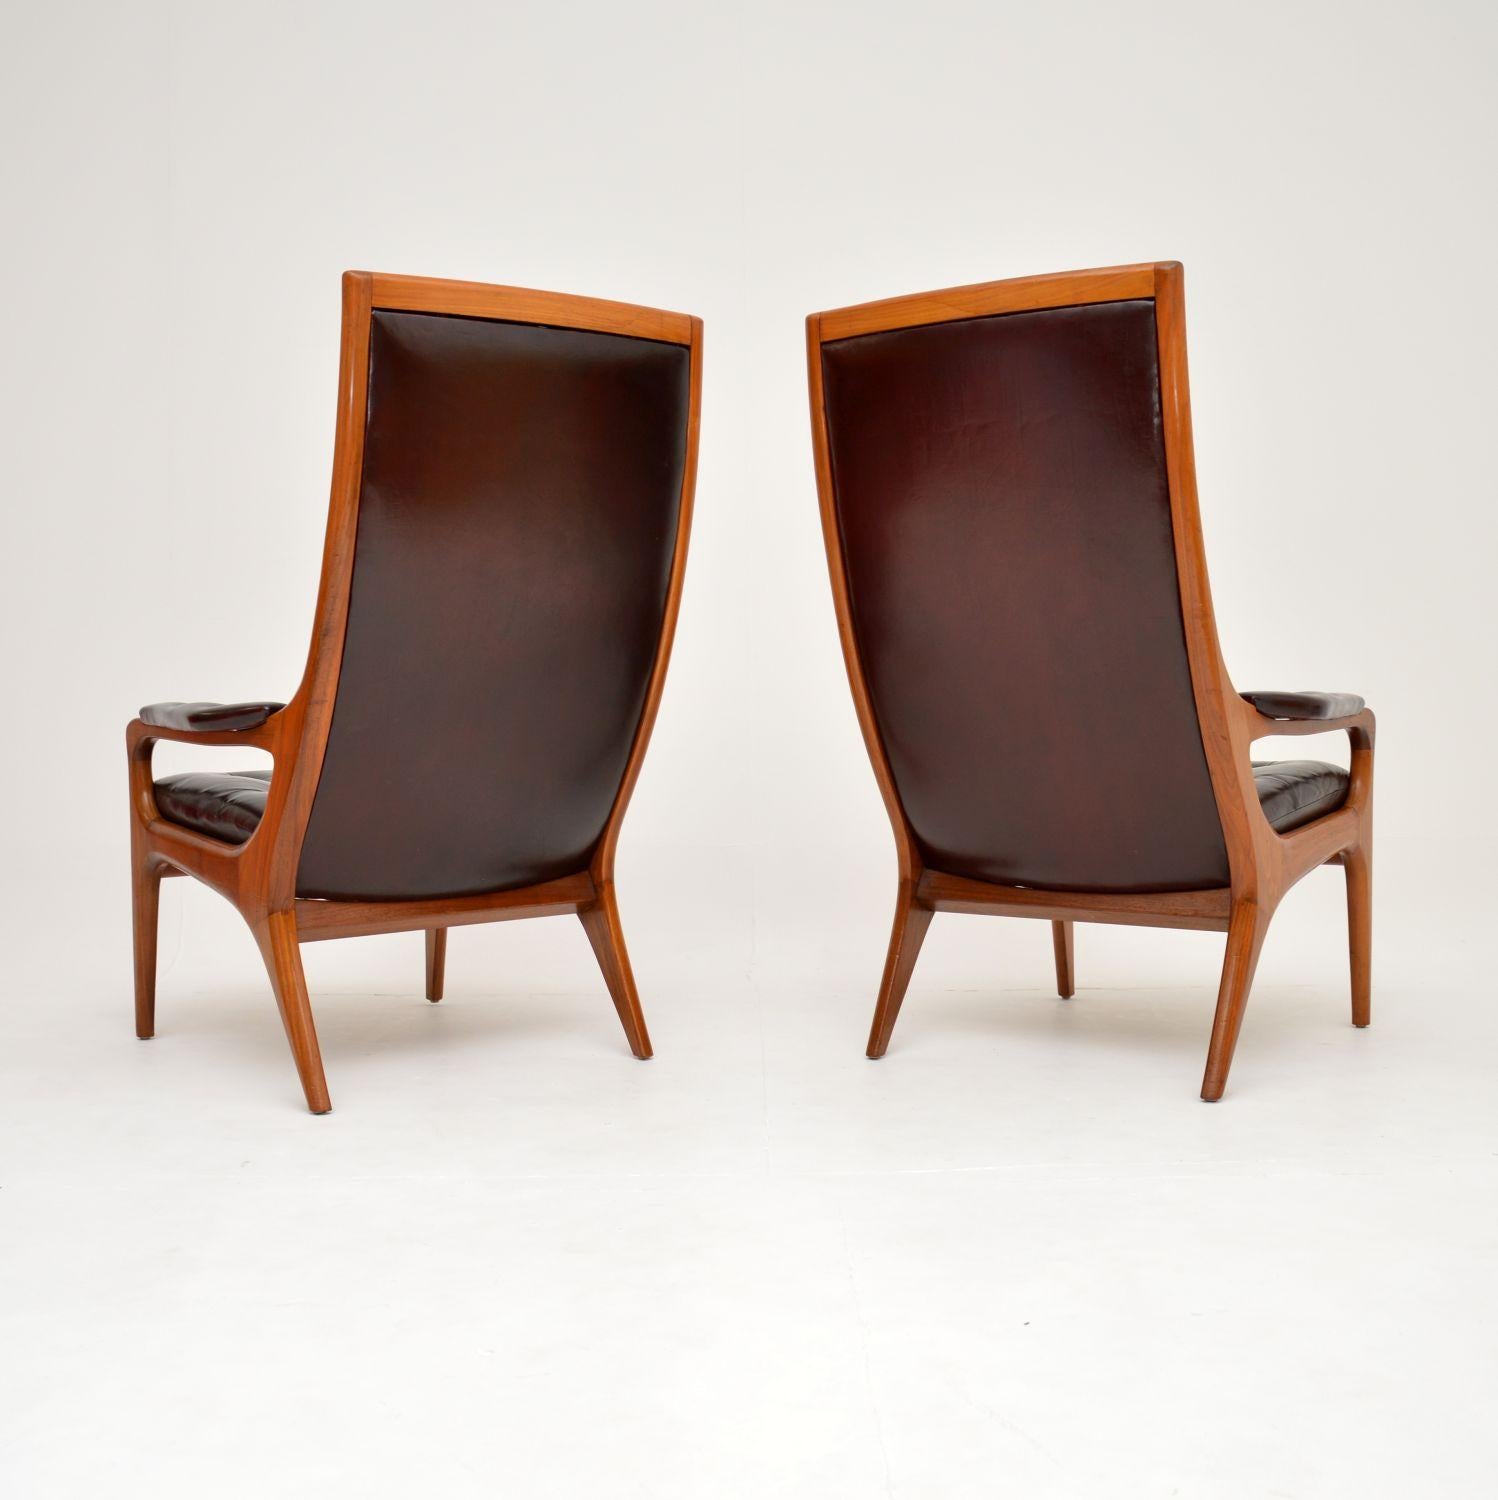 British 1960’s Pair of Vintage Walnut & Leather Armchairs by Howard Keith